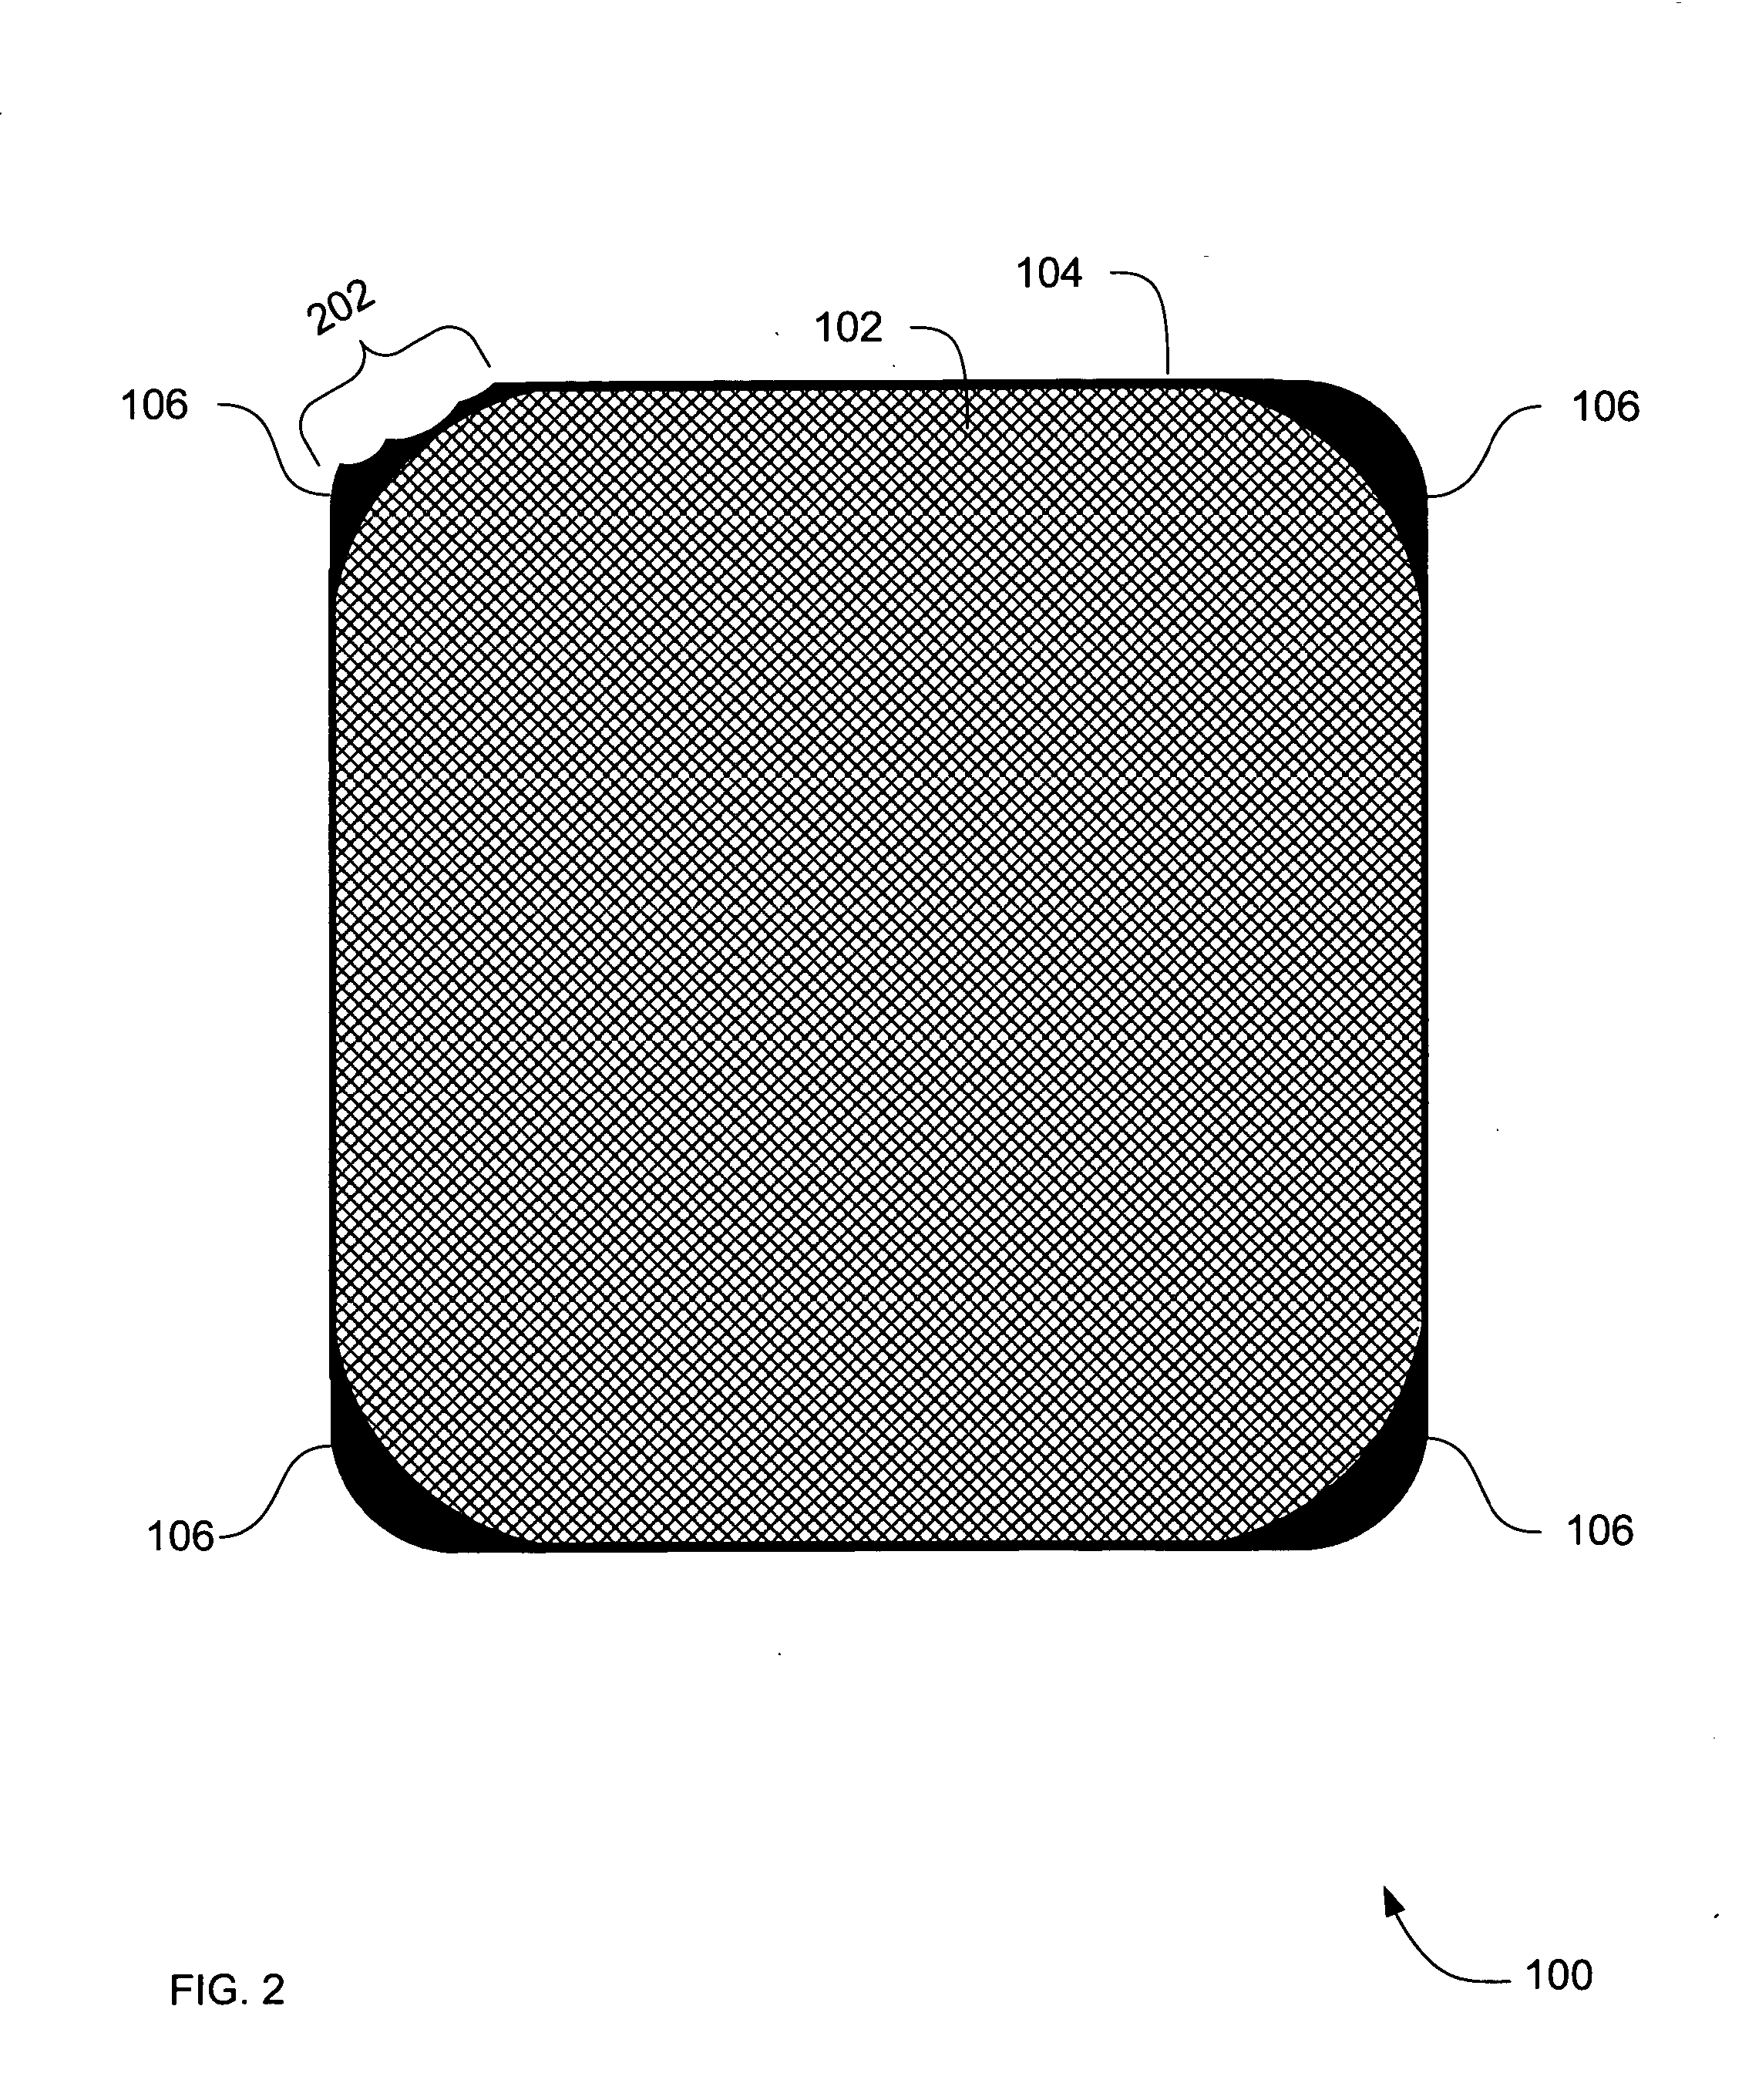 Systems, methods, and apparatus for a kinetic energy absorbing device